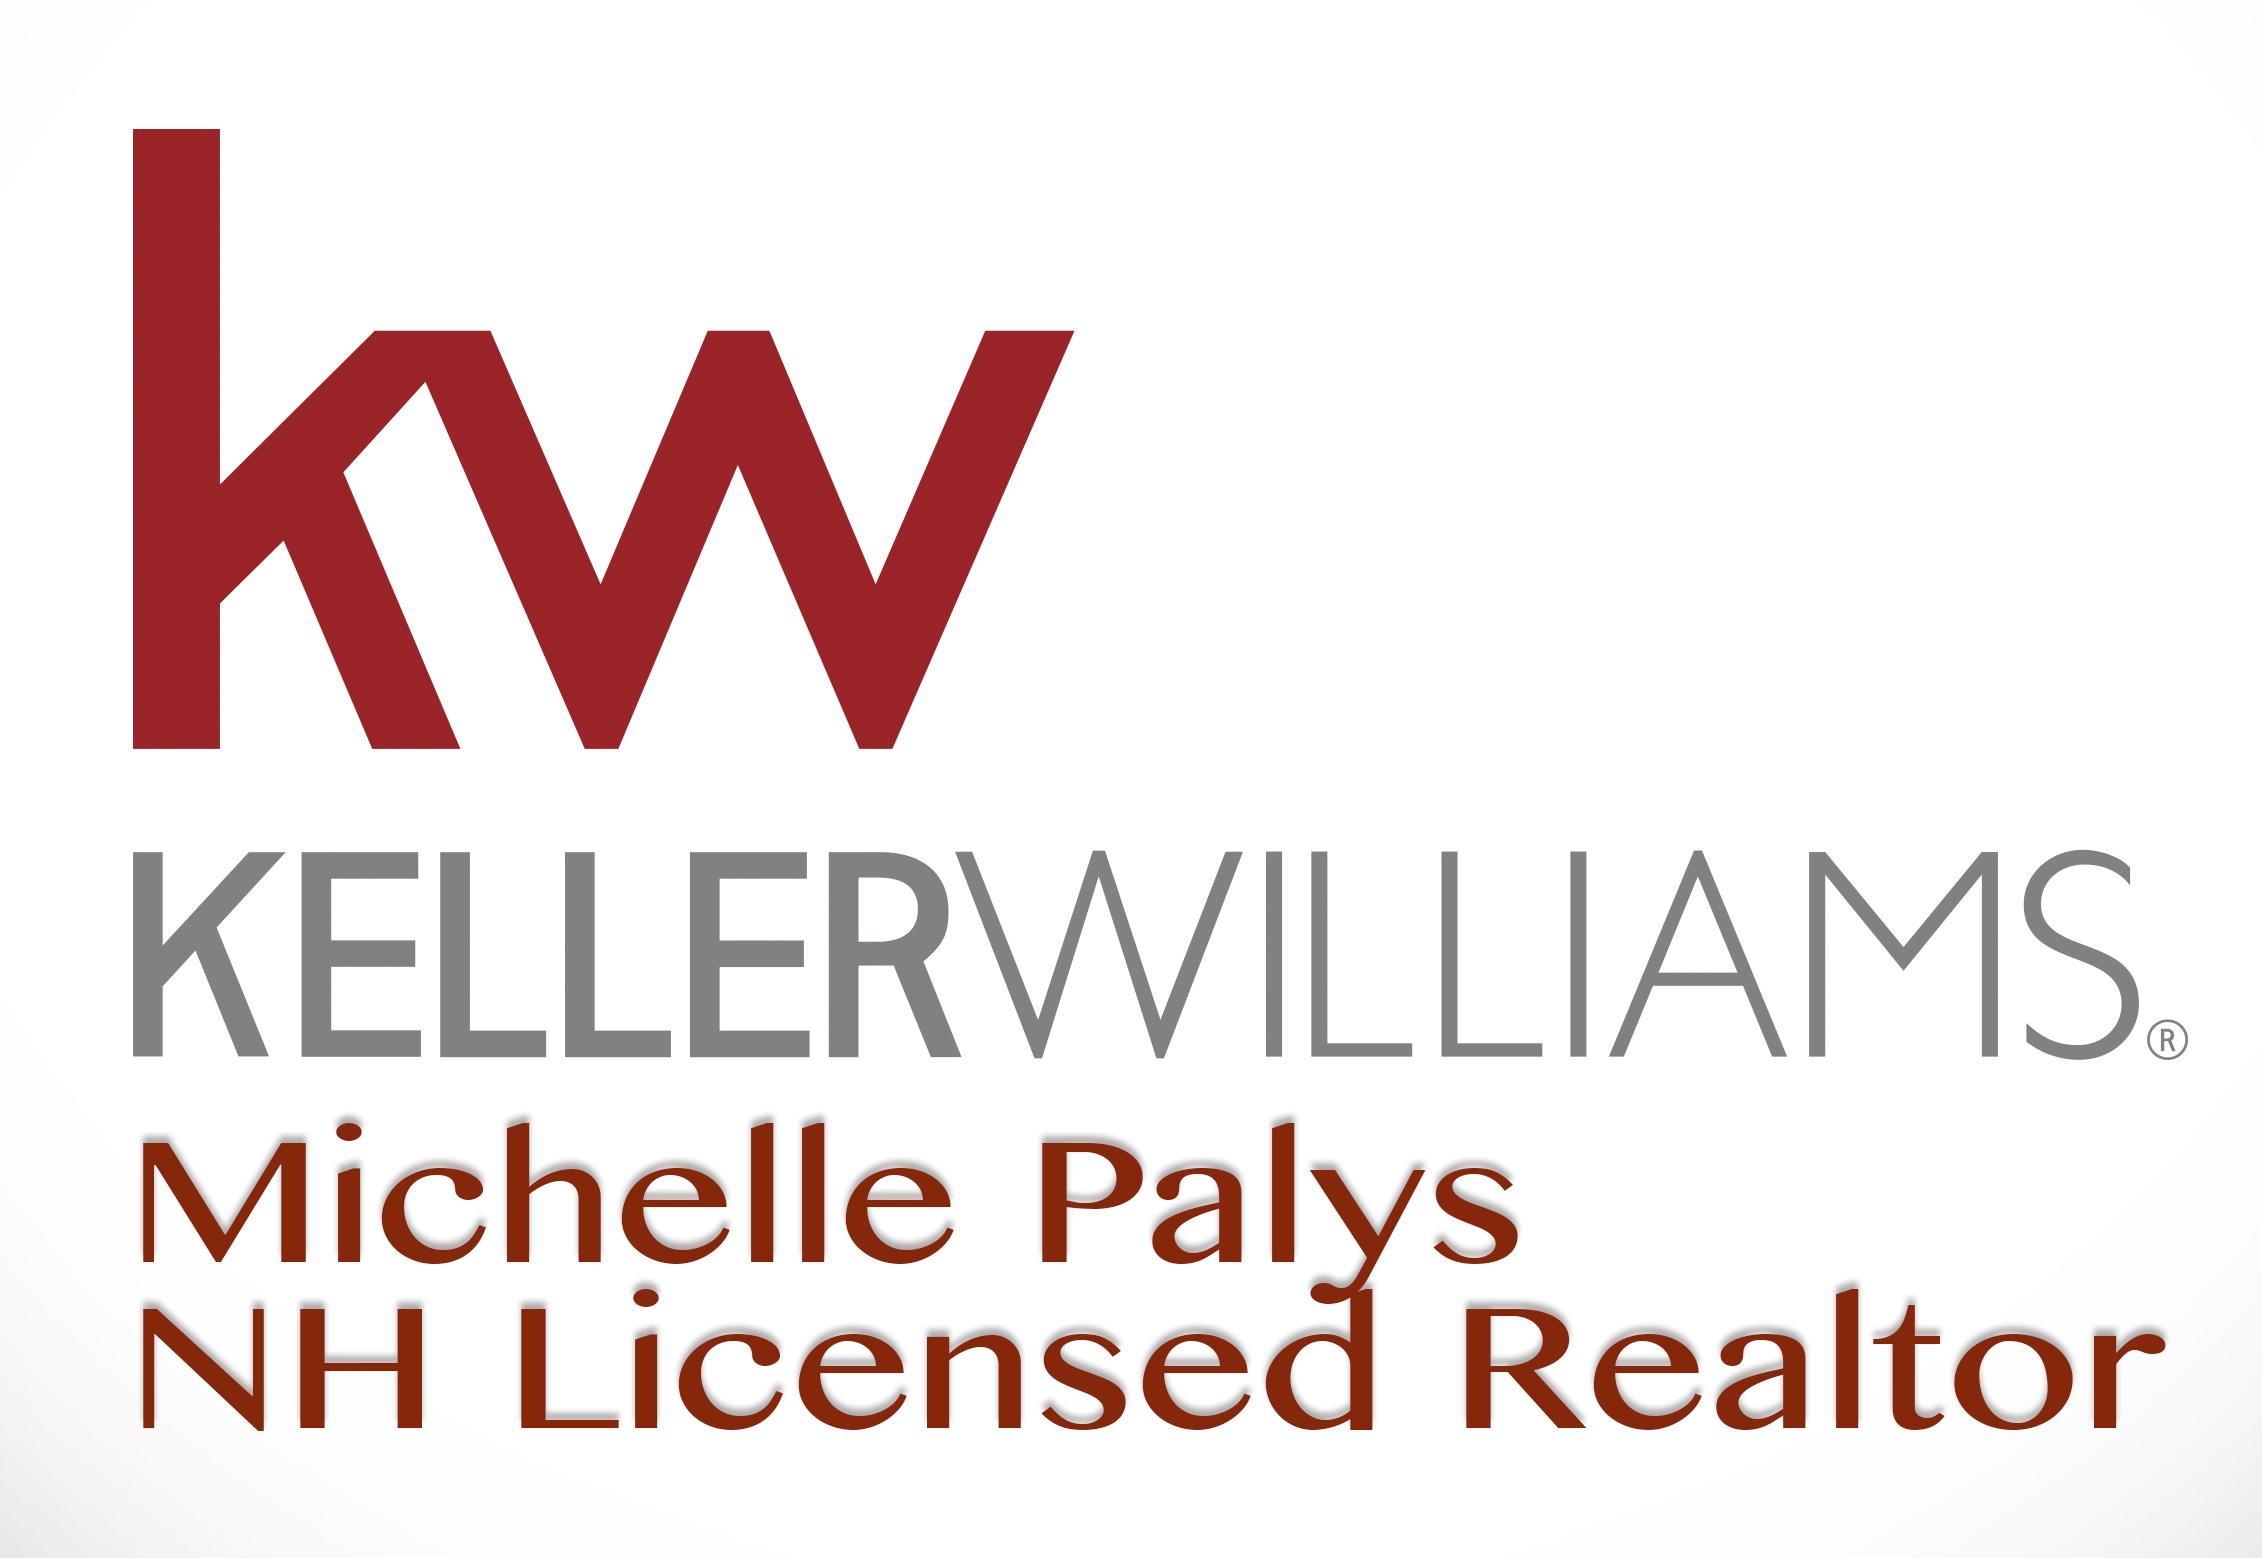 Michelle Palys is a Keller Williams Realty Metropolitan Licensed NH Real Estate Agent & Realtor